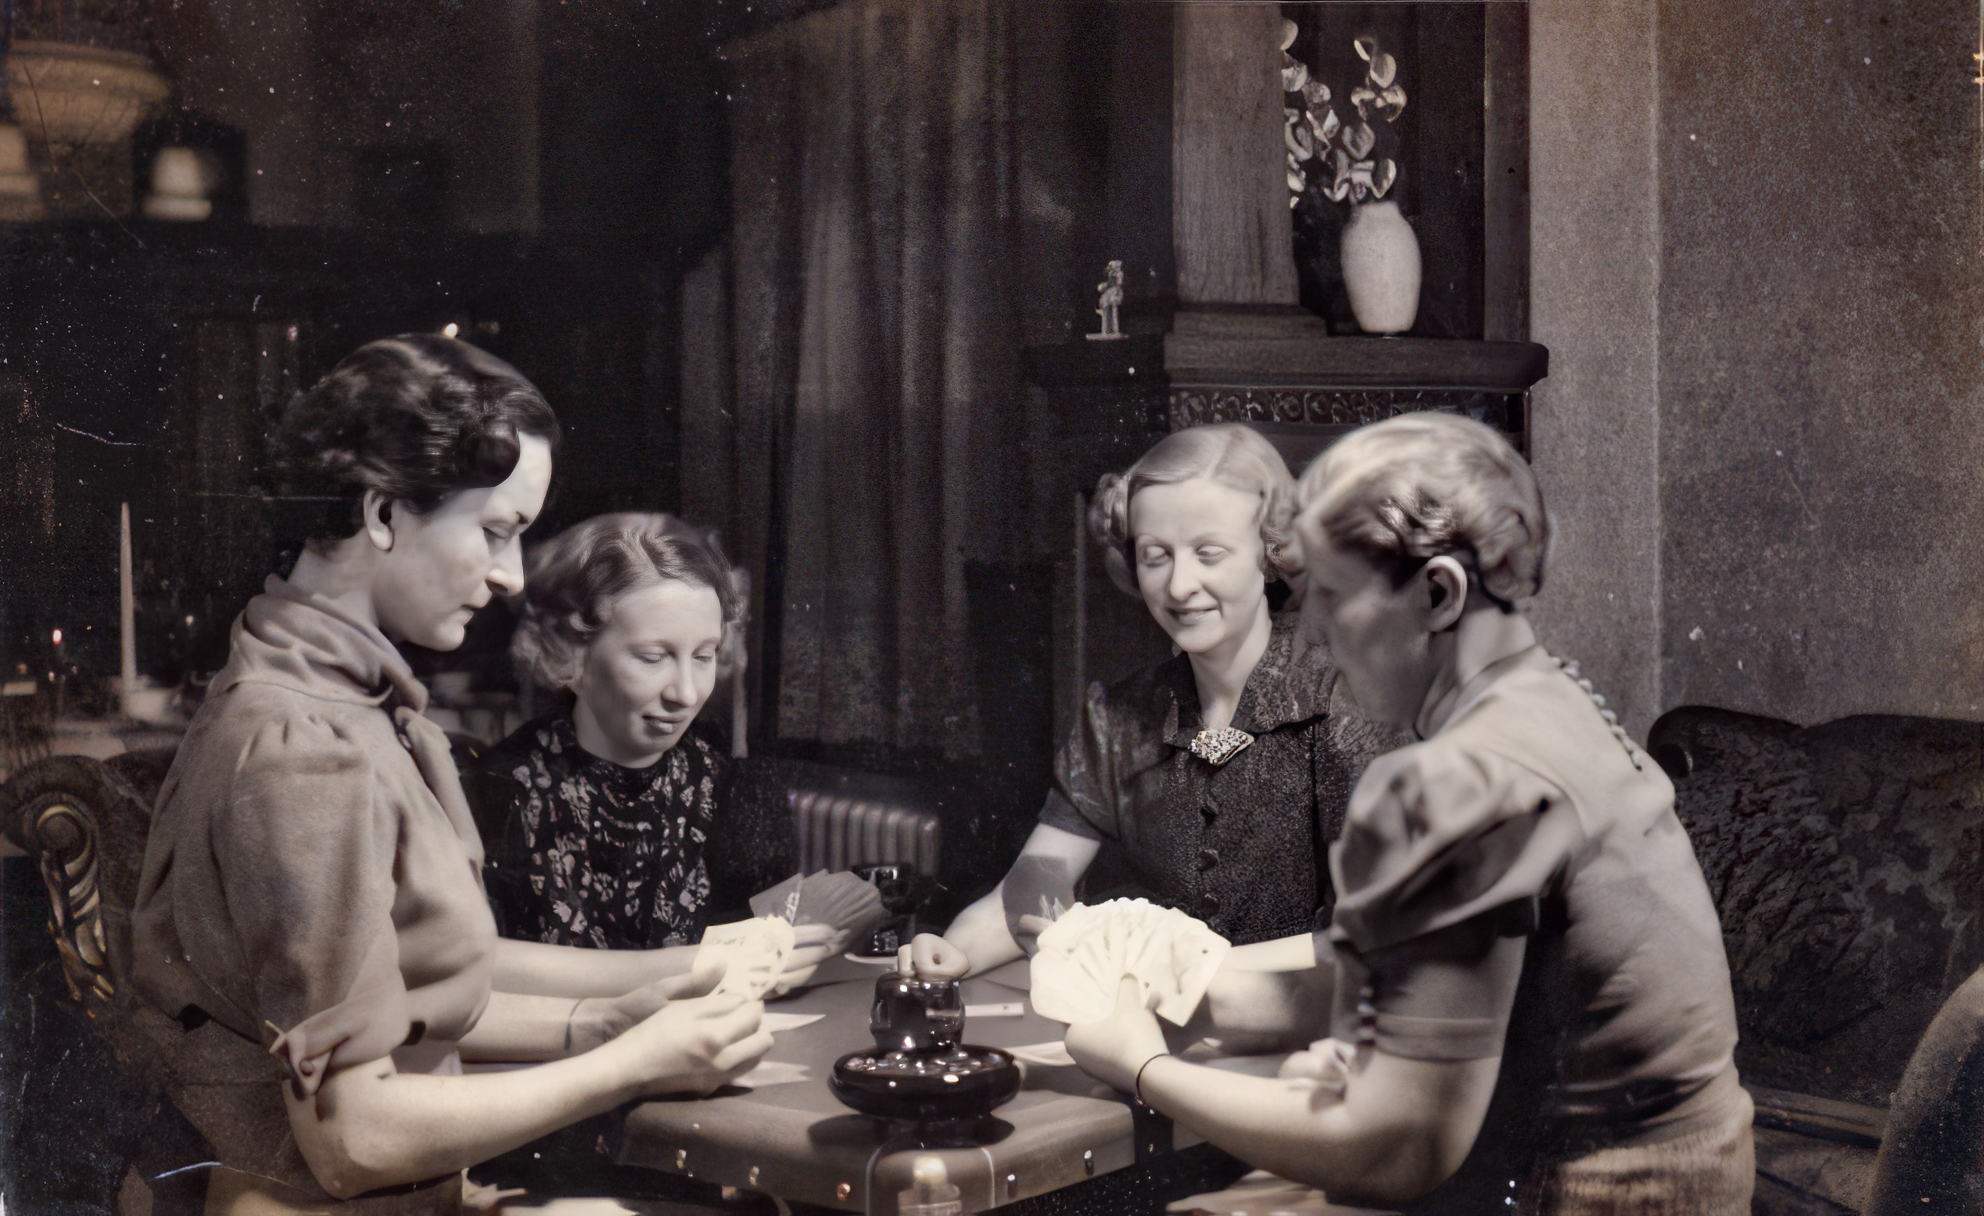 Playing cards, Chicago, c. 1940